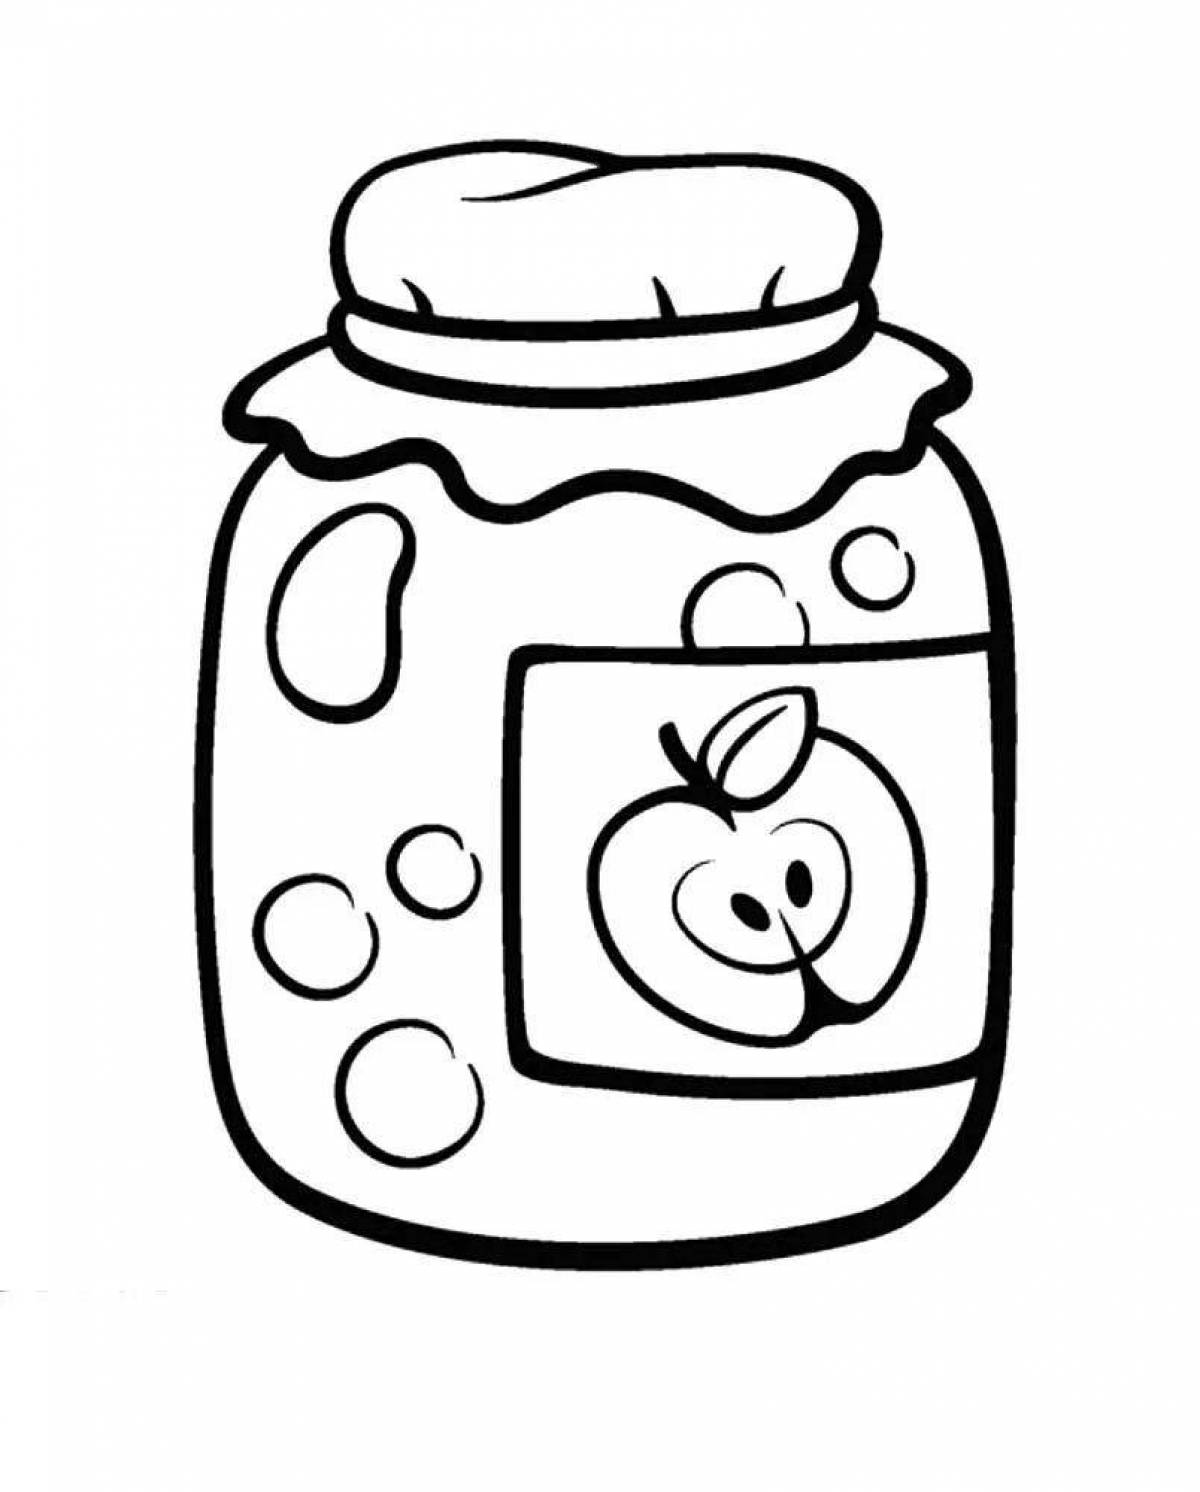 Glowing Frutonnanny coloring page